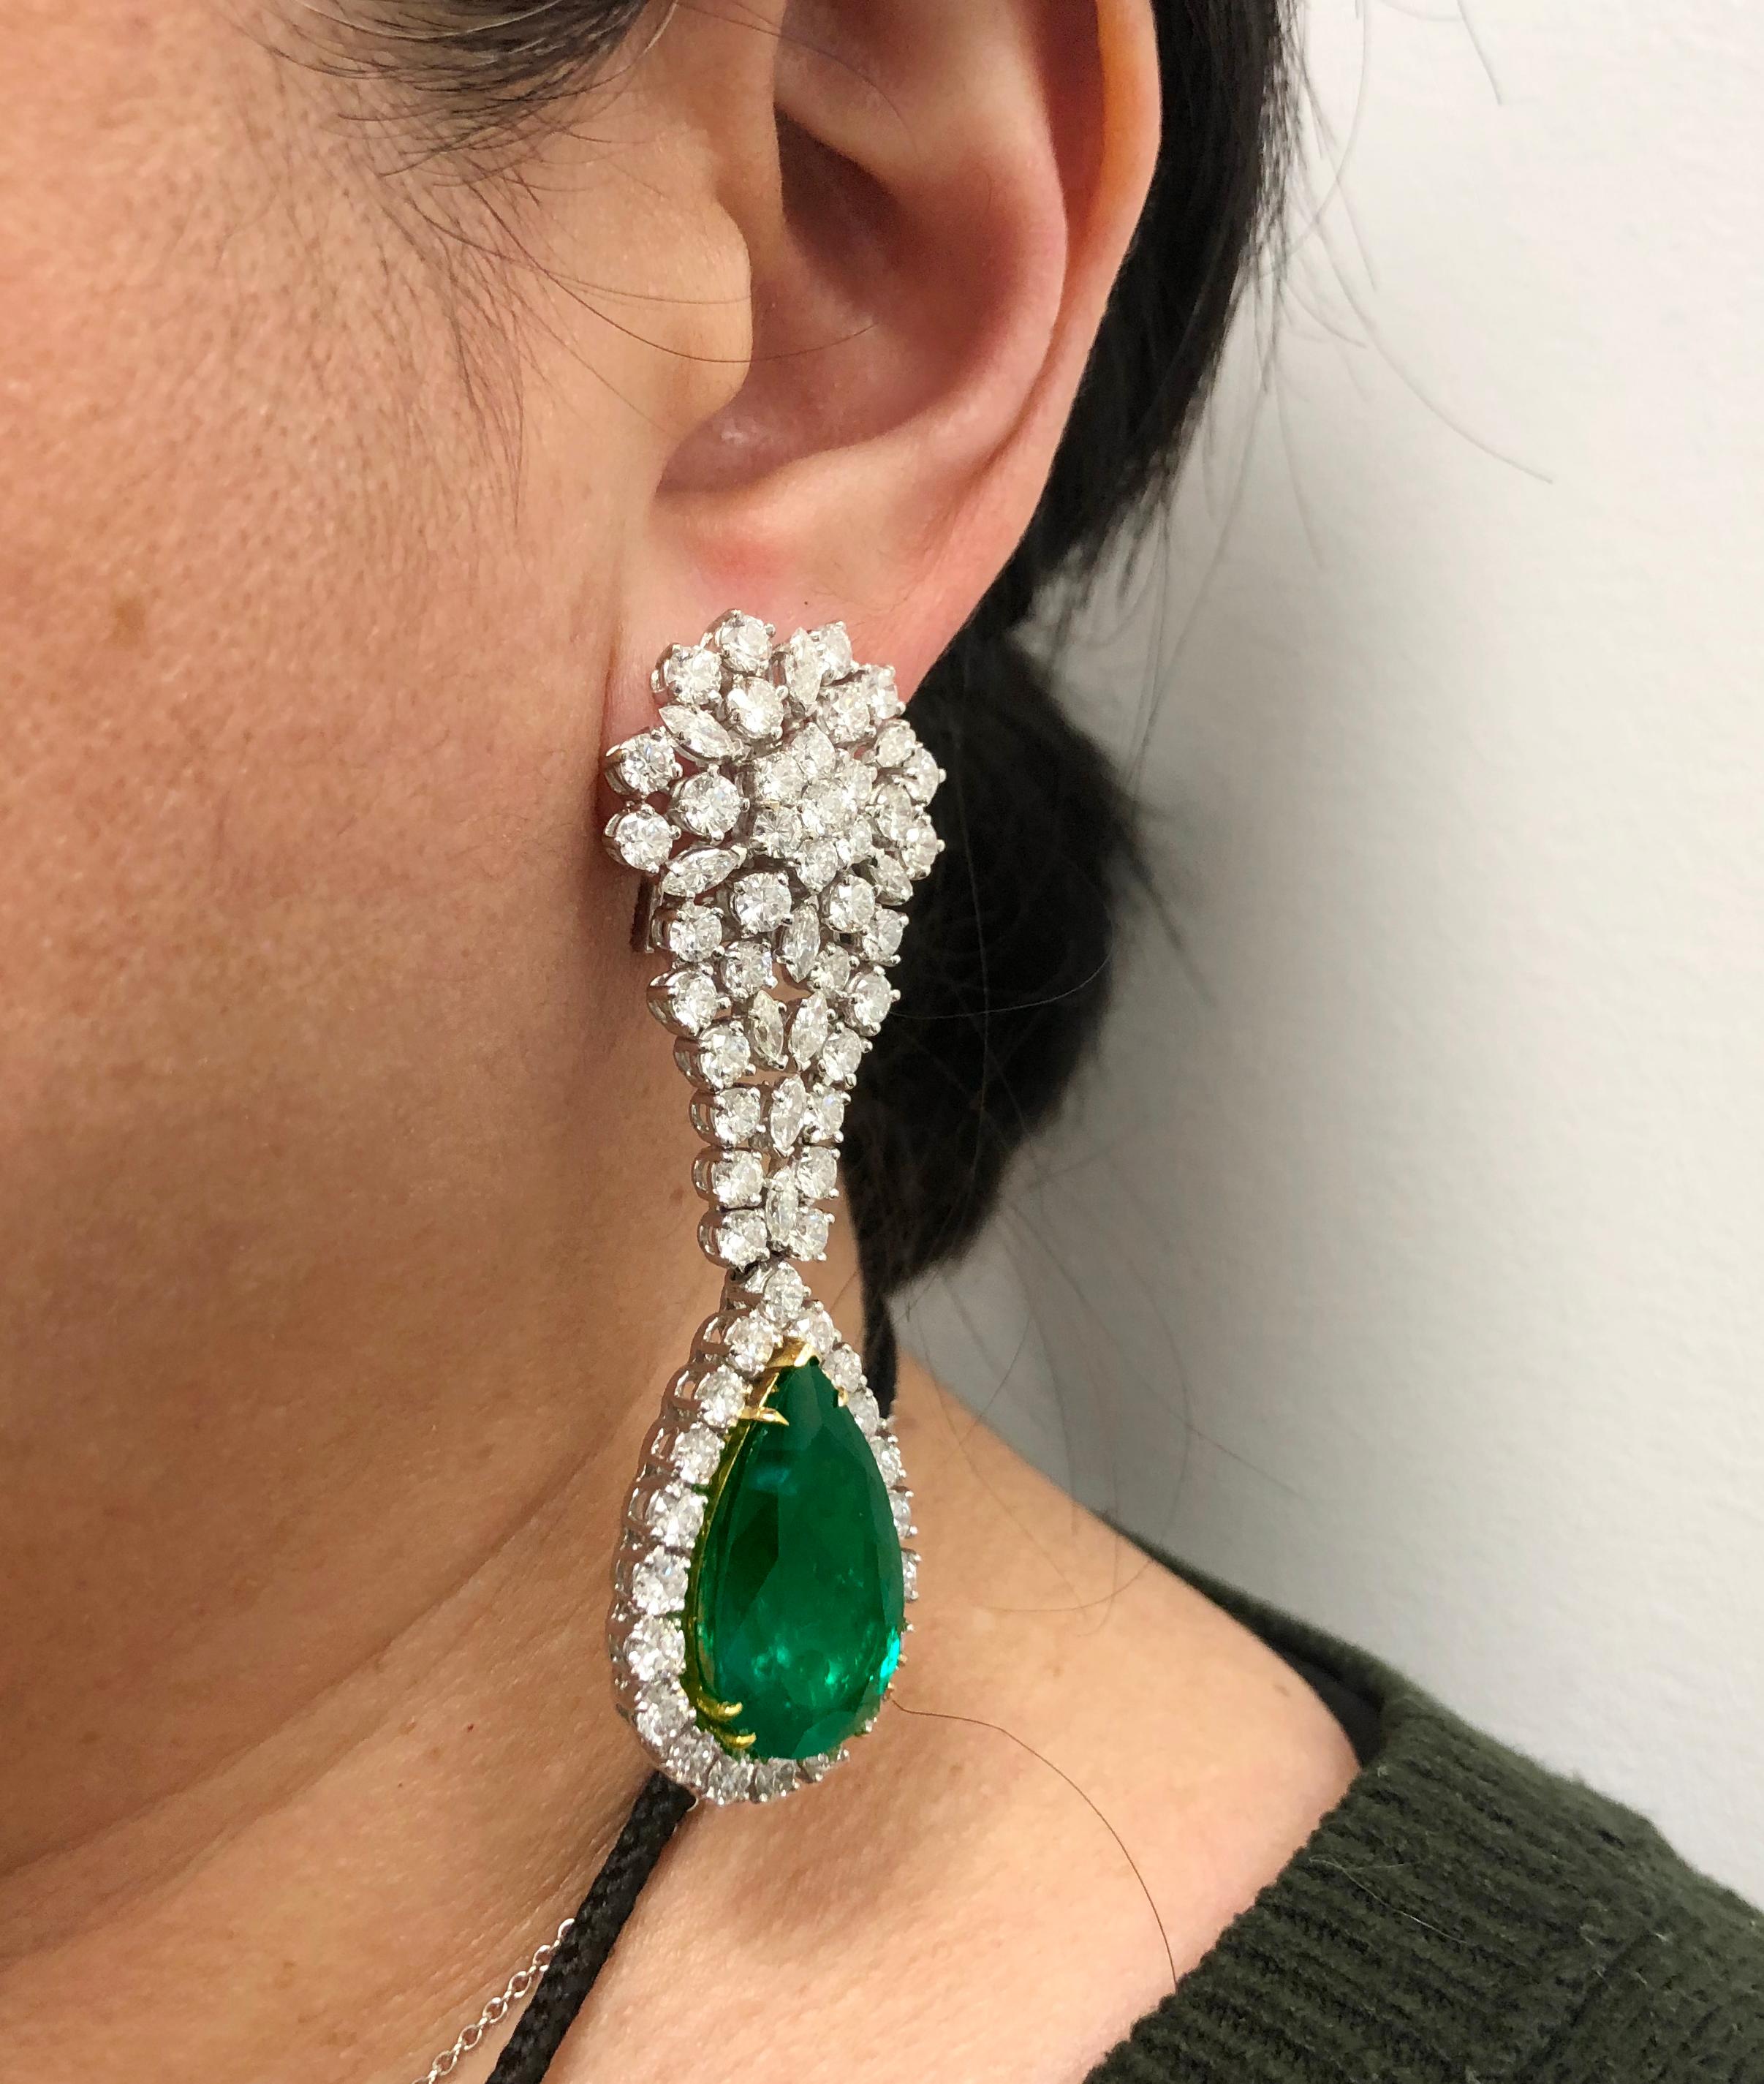 A unique pair of hanging earrings, crafted in 18k white gold, each featuring a large drop pear-shaped emerald, together weighing over 36 carats, surrounded by 15 carats of brilliant diamonds.  

Approx. 36.60 carats of emerald and 15cts. diamond